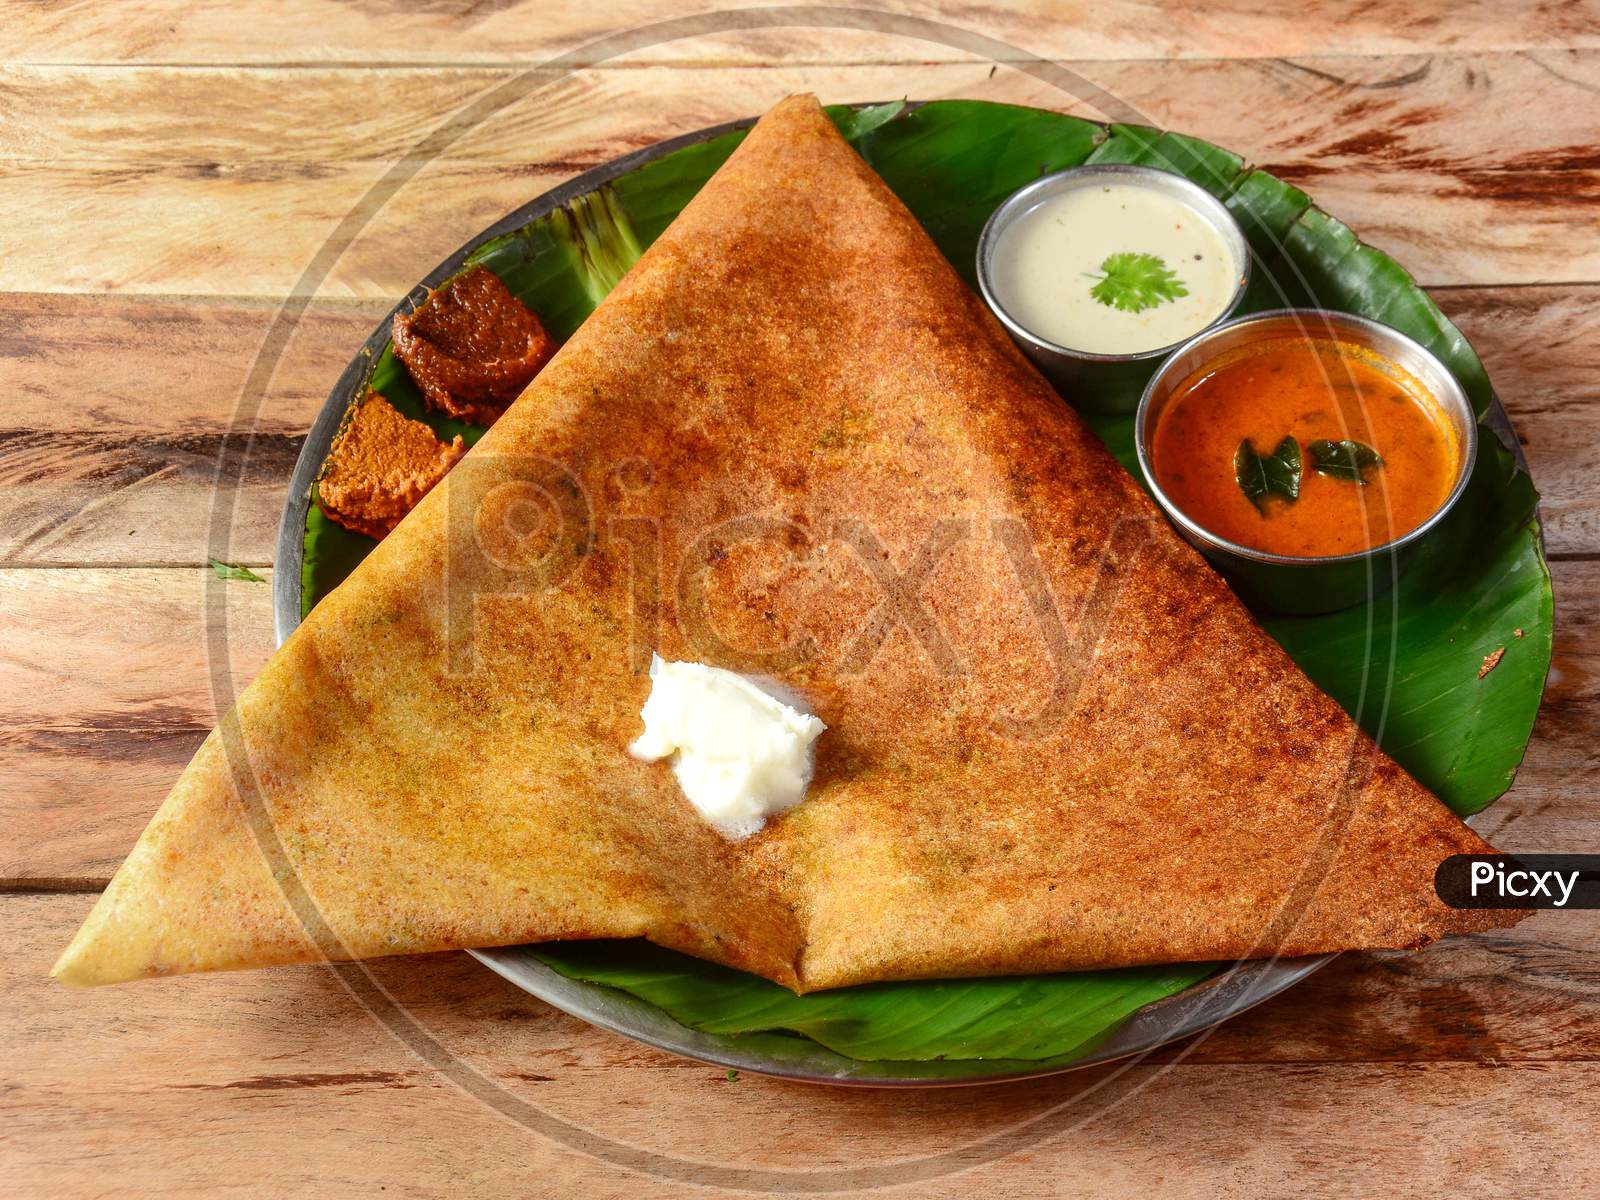 Mysore Masala Dosa, A Famous South Indian Traditional Breakfast With Filling Of A Mixture Of Mashed Potatoes Served With Different Chutney And Sambar Over A Rustic Wooden Background, Selective Focus